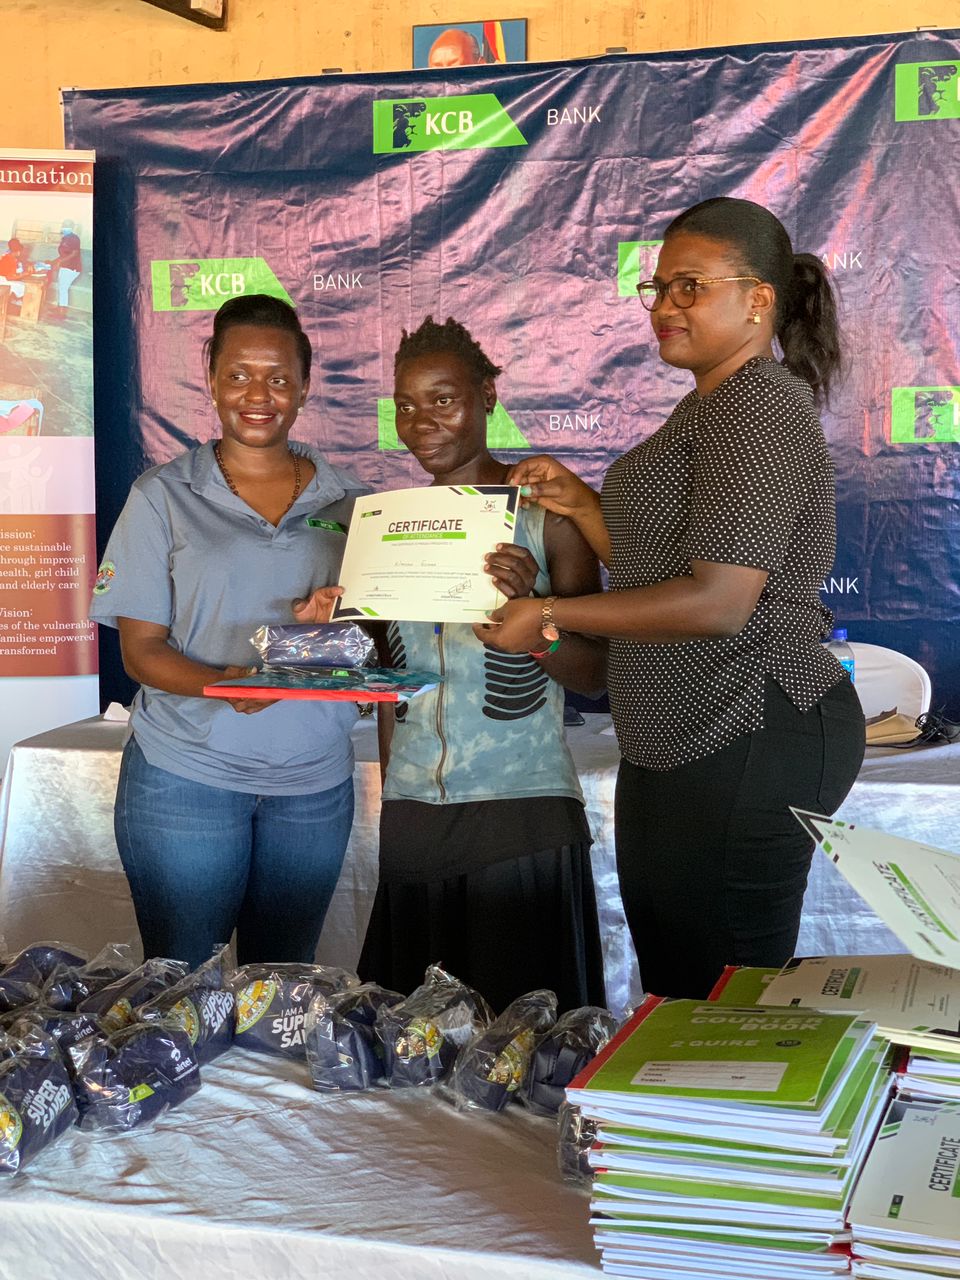 Women And Youth Empowered With Hands-On Skills From KCB Bank Uganda’s Support To Burgess Foundation.